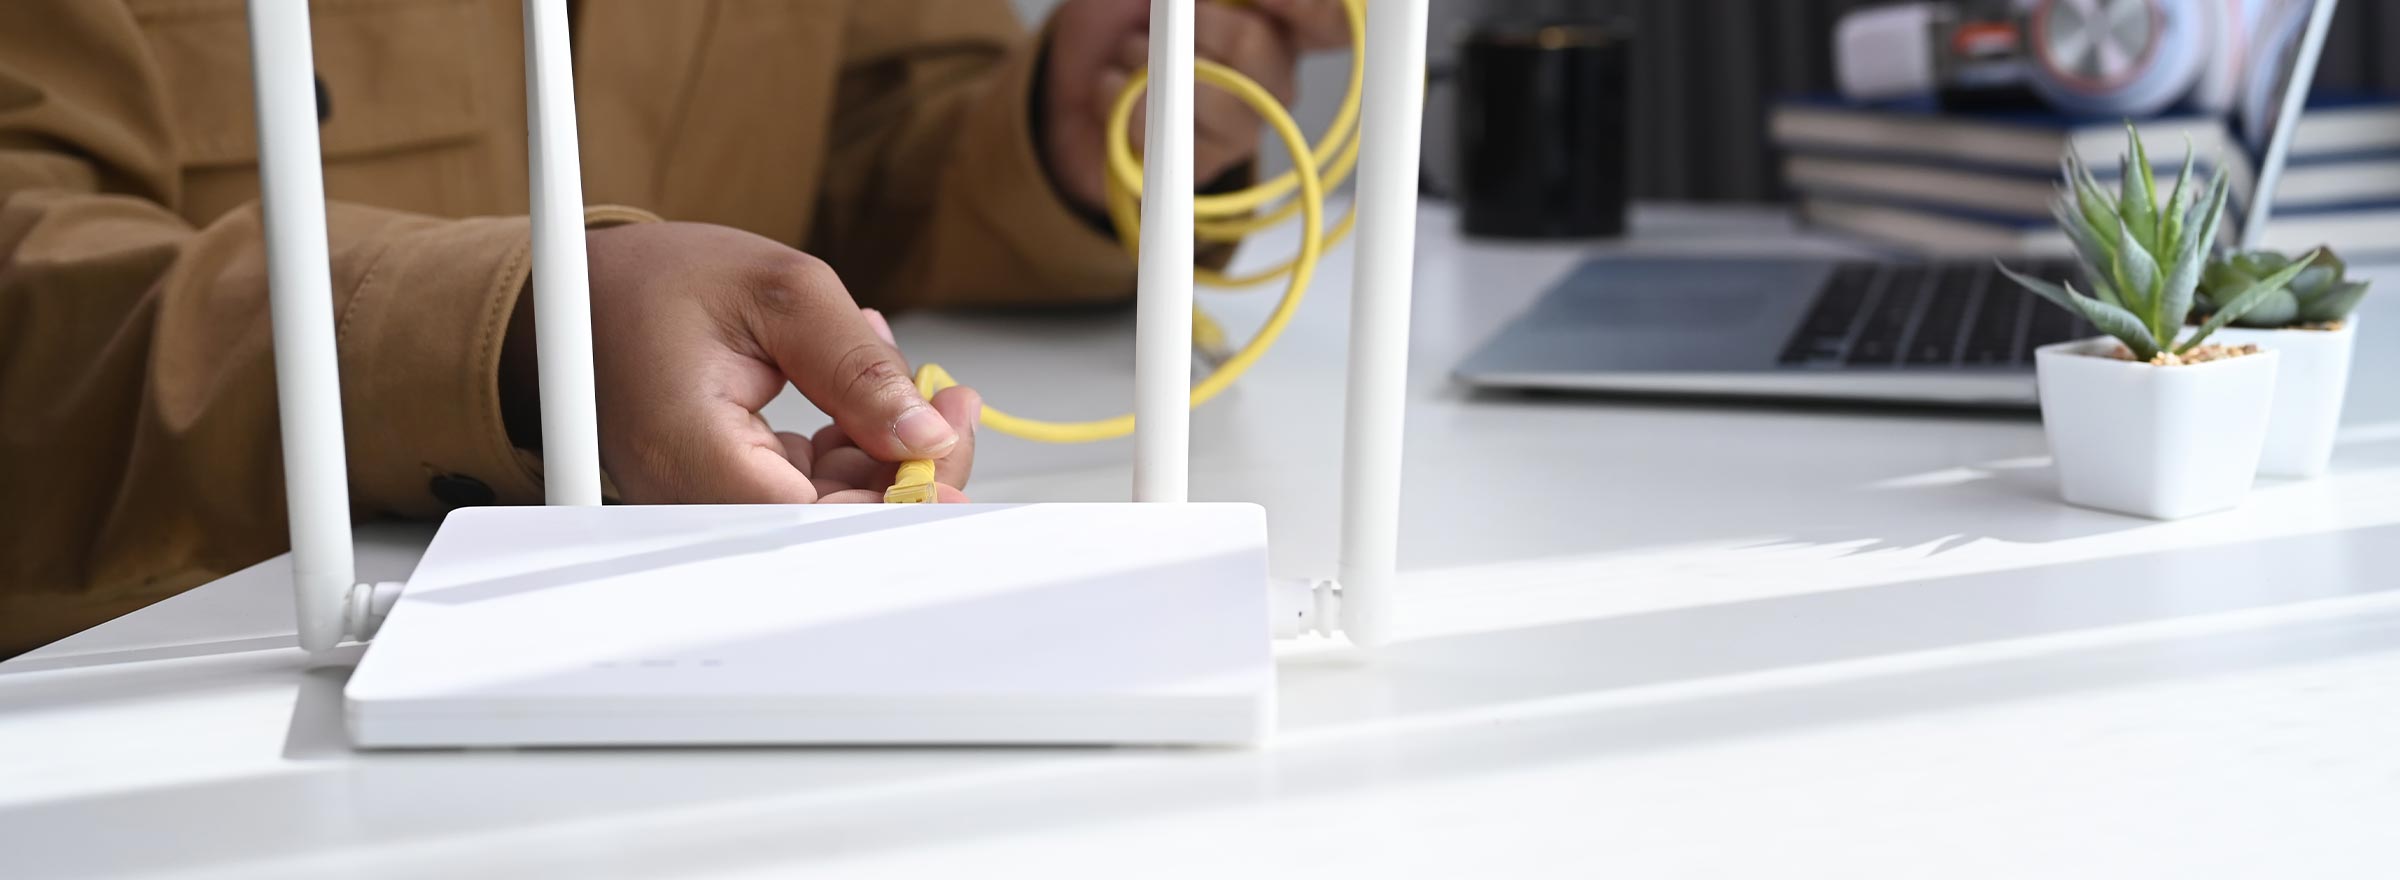 hand of someone attaching a cable to a router